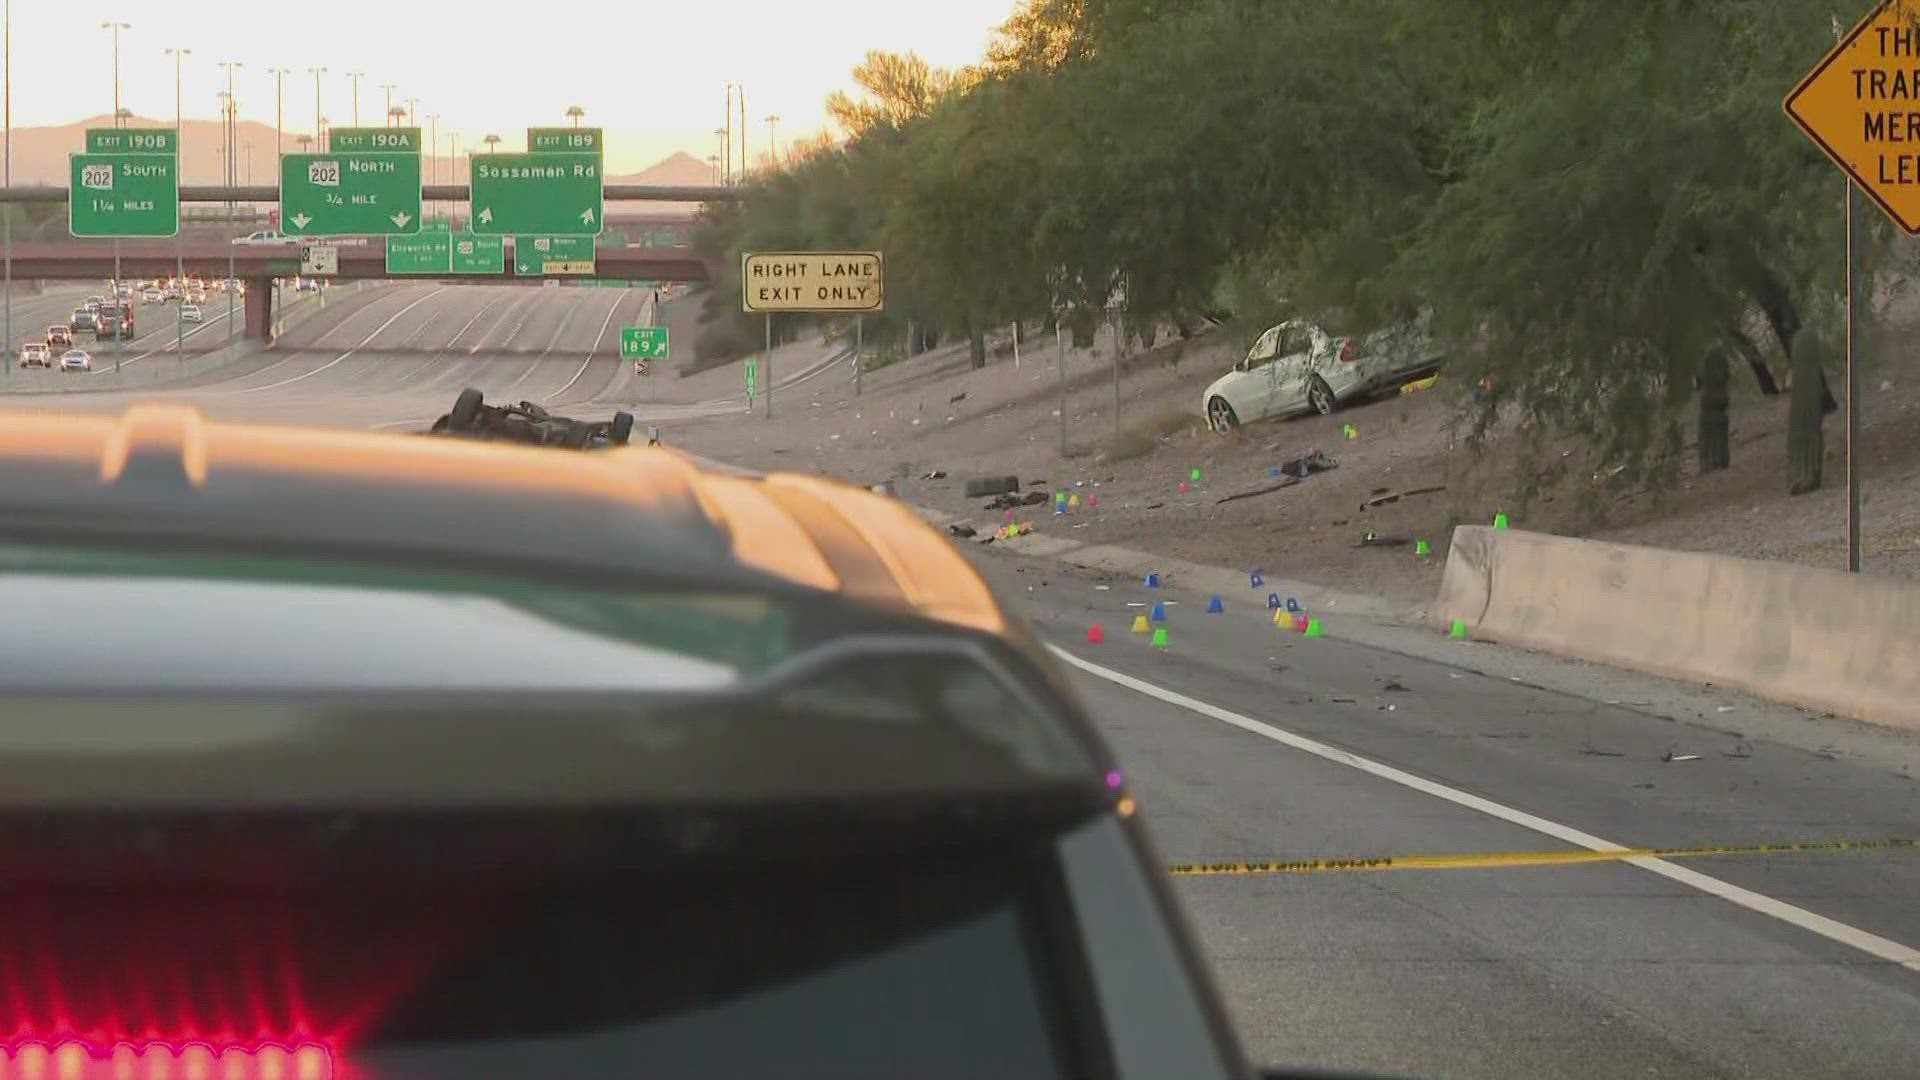 Two people are dead after an early morning crash on the US 60 near Sossaman Road in Mesa. Here's the initial information from the scene.